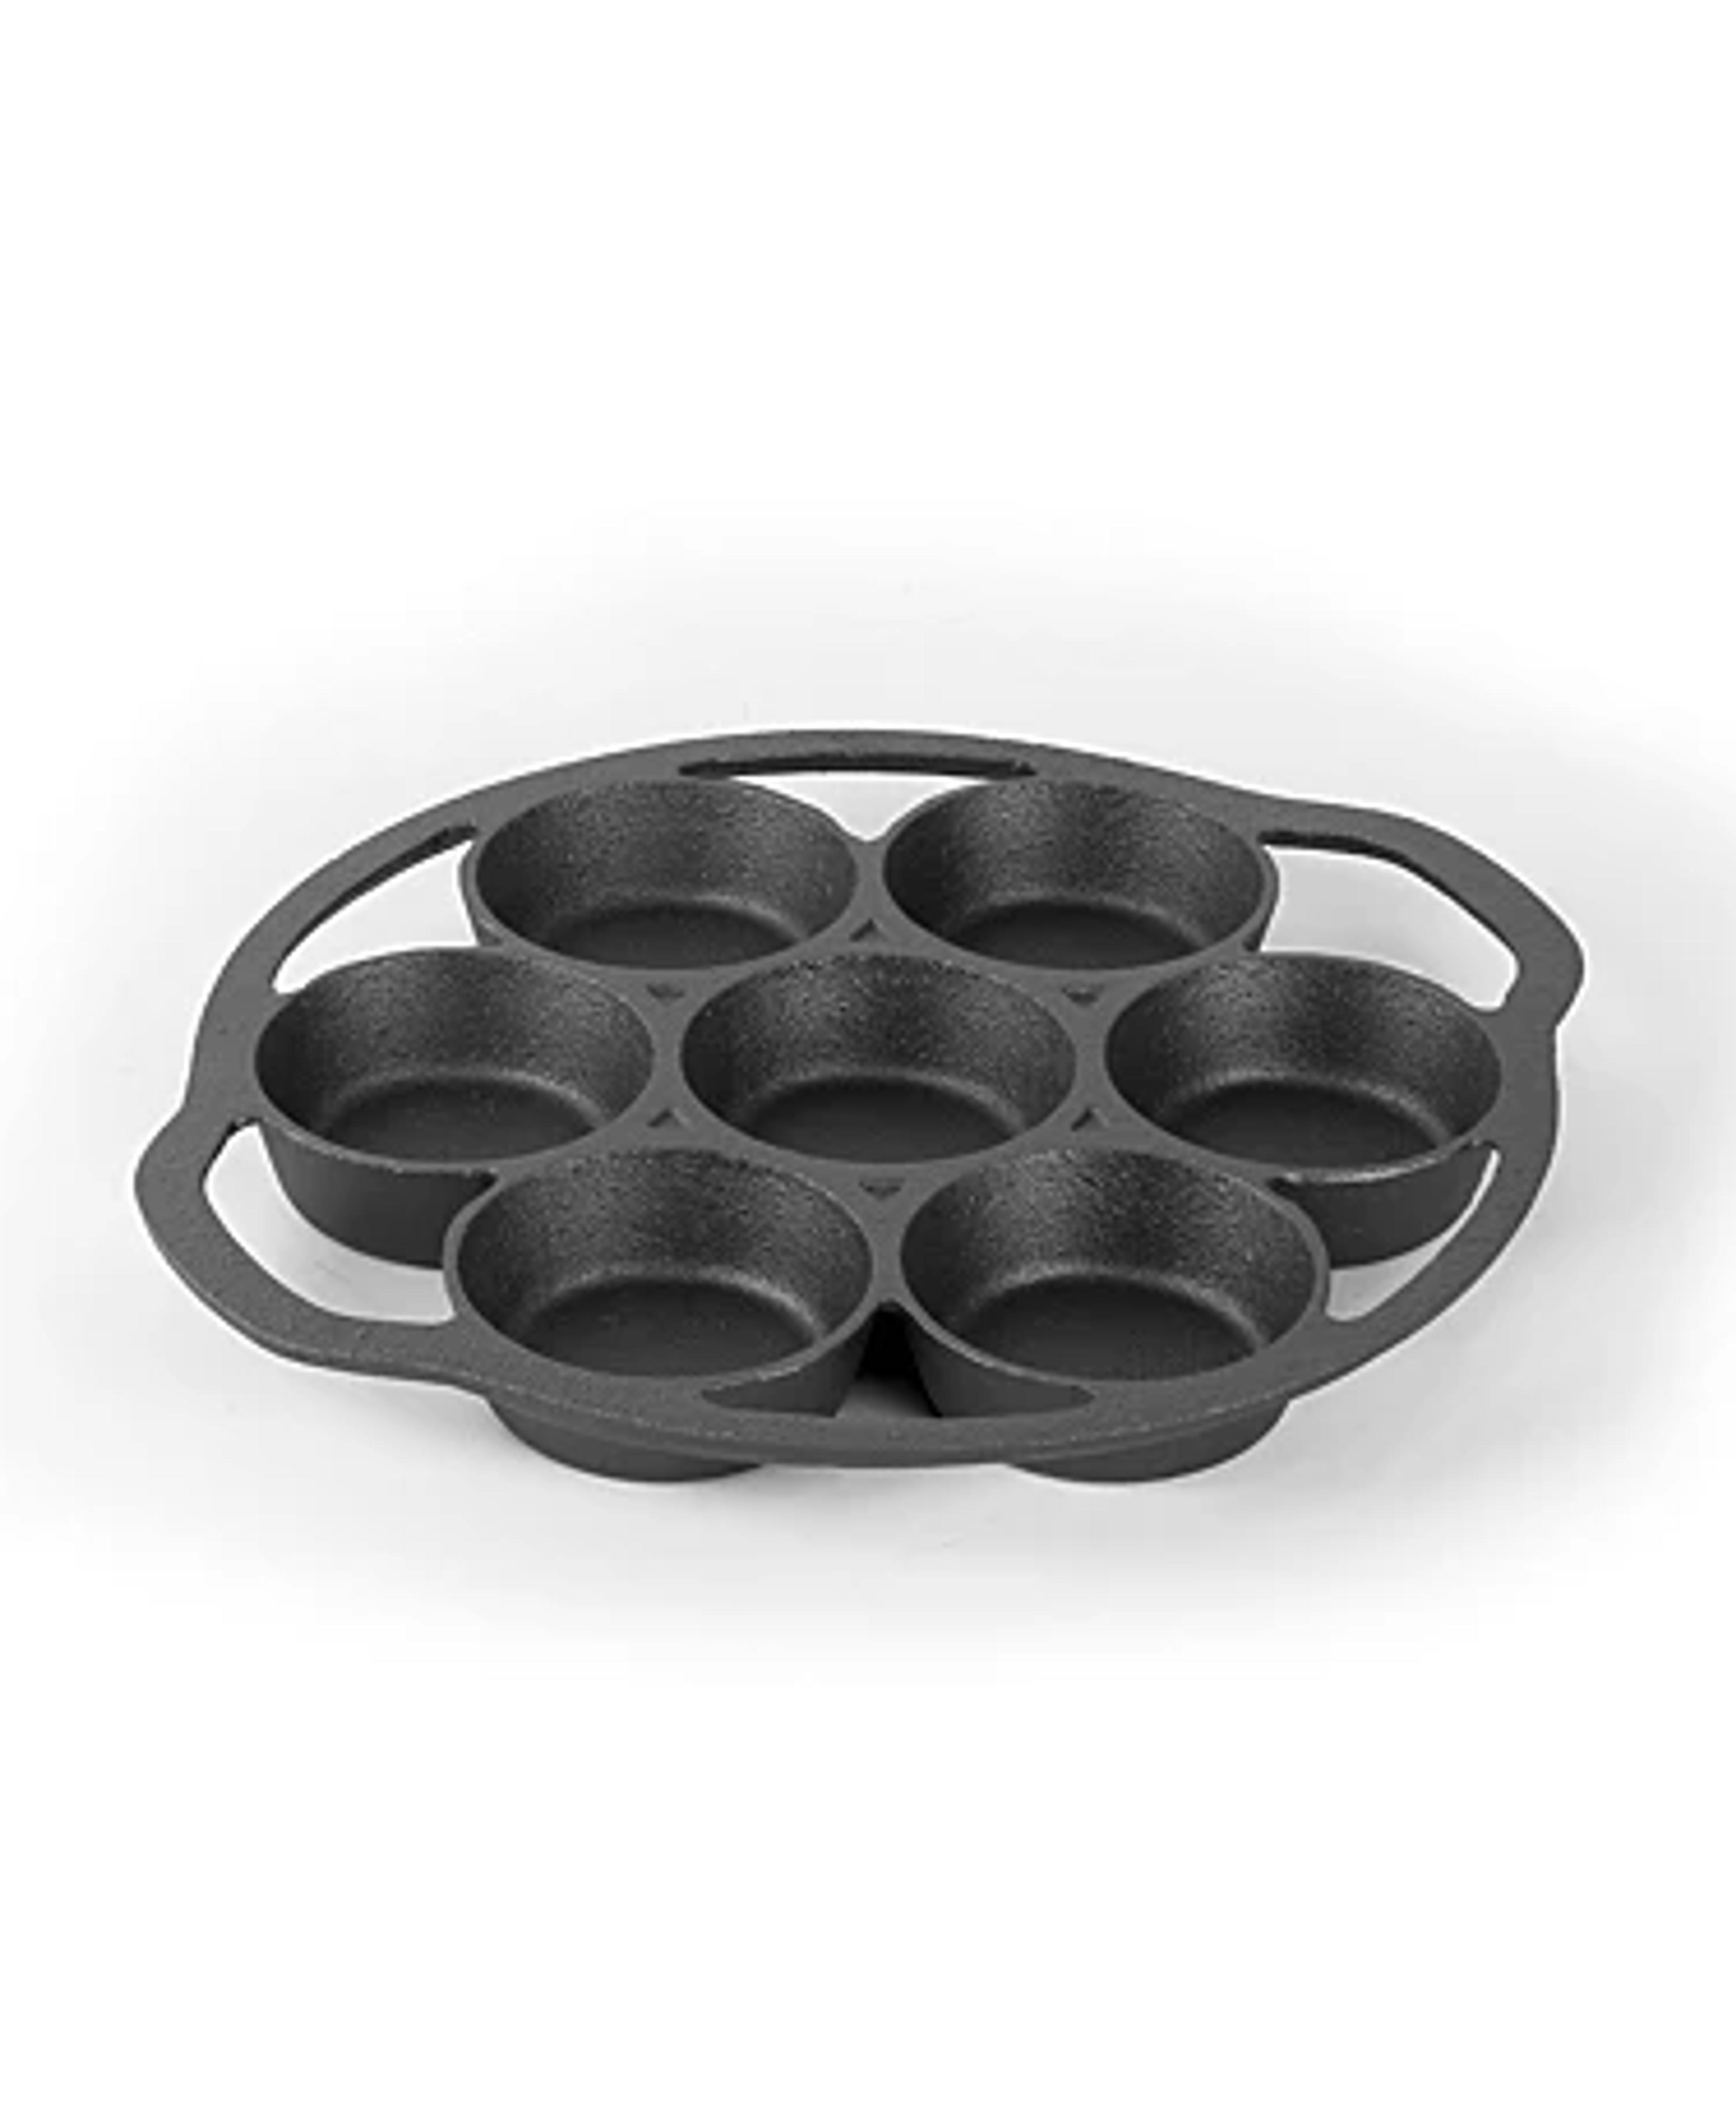 Commercial Chef Cast Iron Biscuit Pan - Macy's